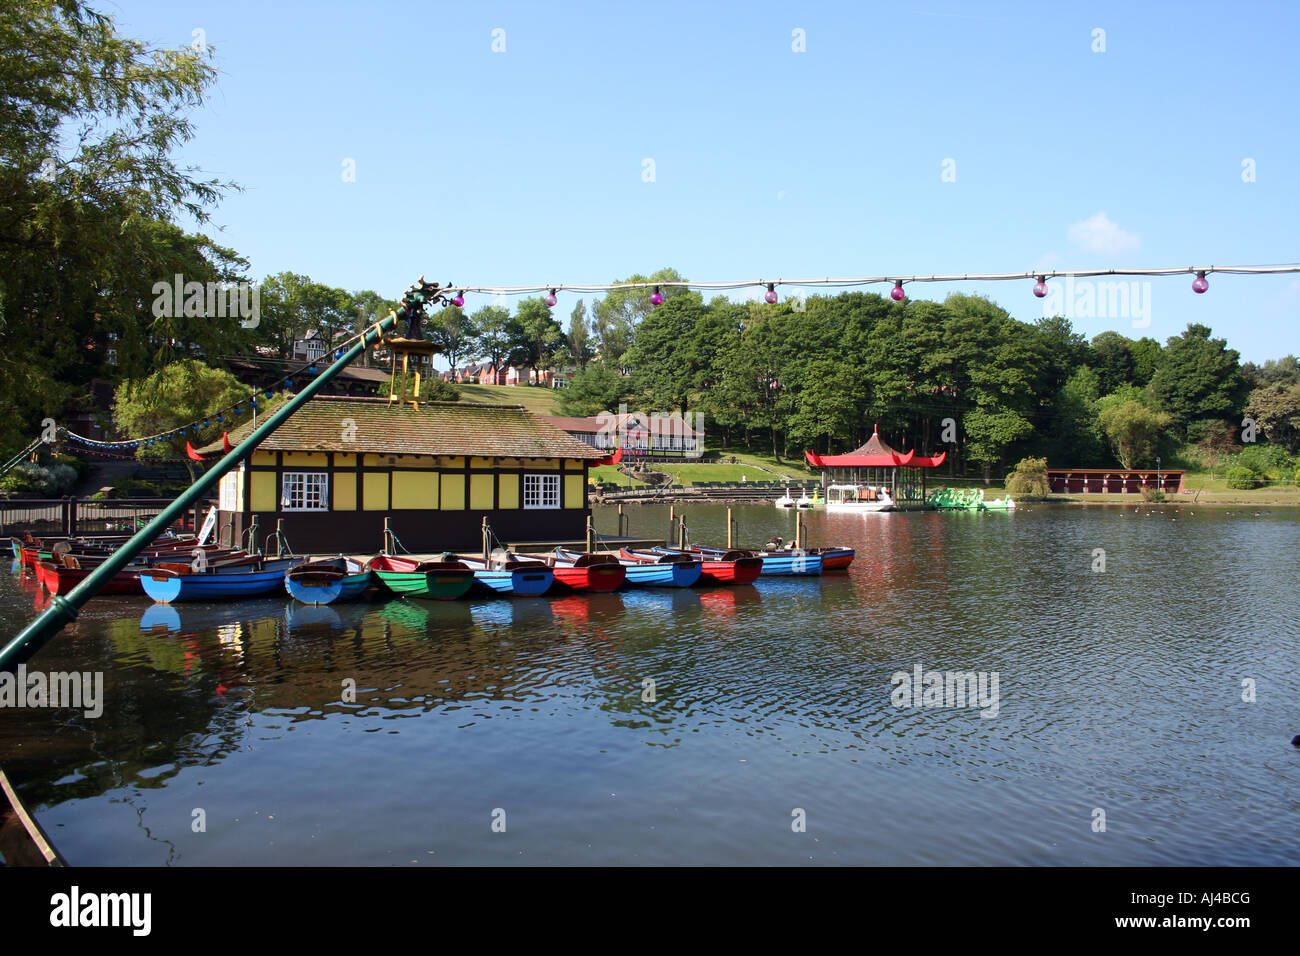 Peasholm park boating lake on the north side pictured in the resort of Scarborough in North Yorkshire in England. Stock Photo